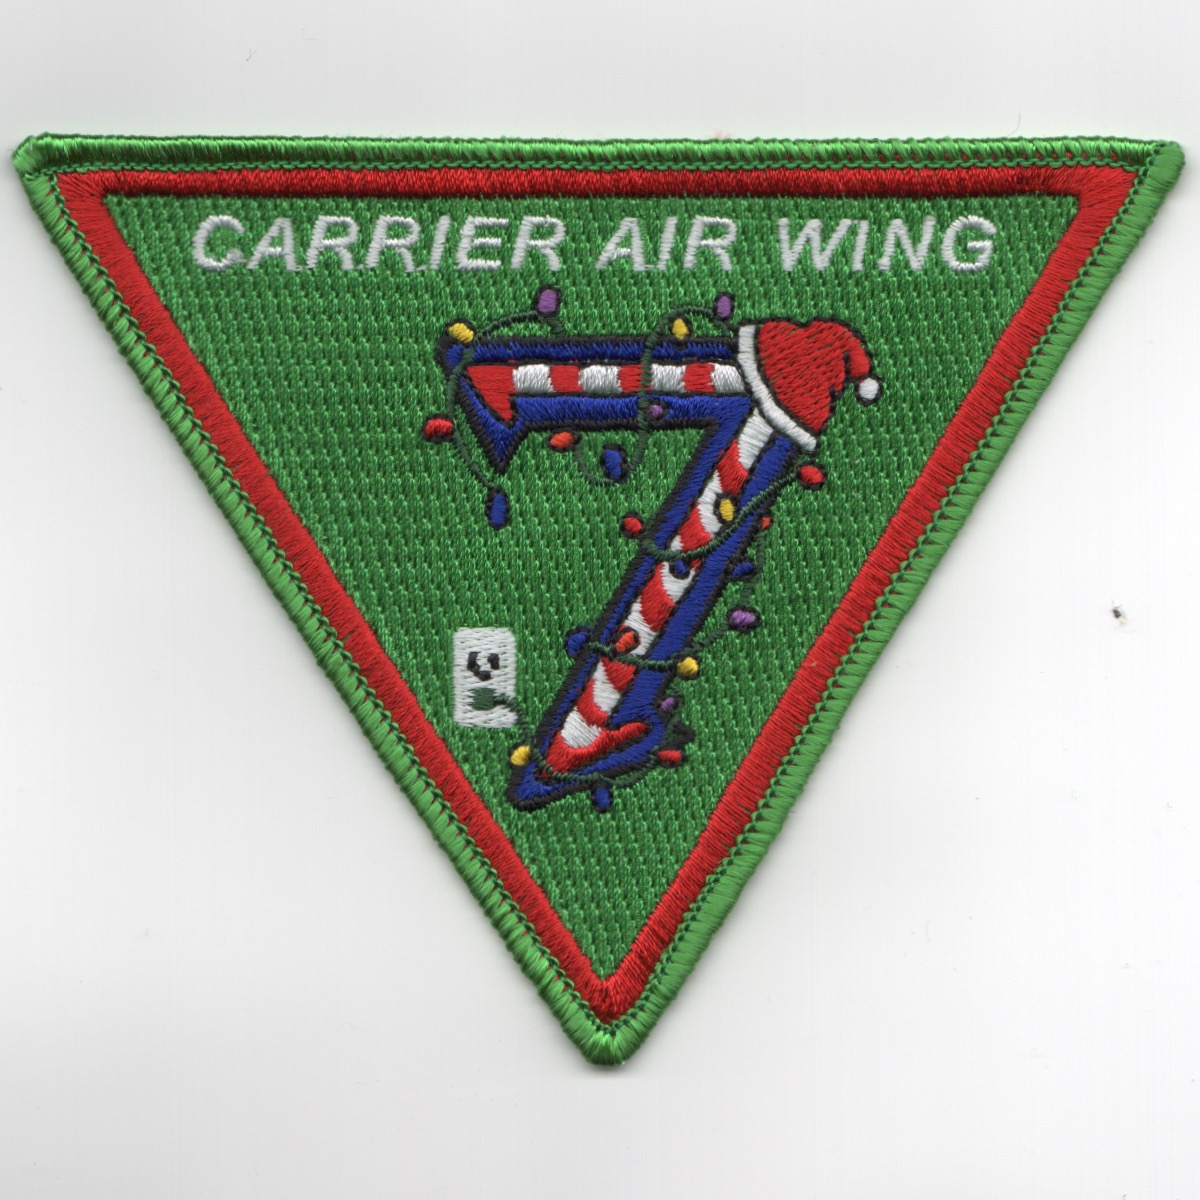 CVW-7 'CHRISTMAS' Patch (Green)